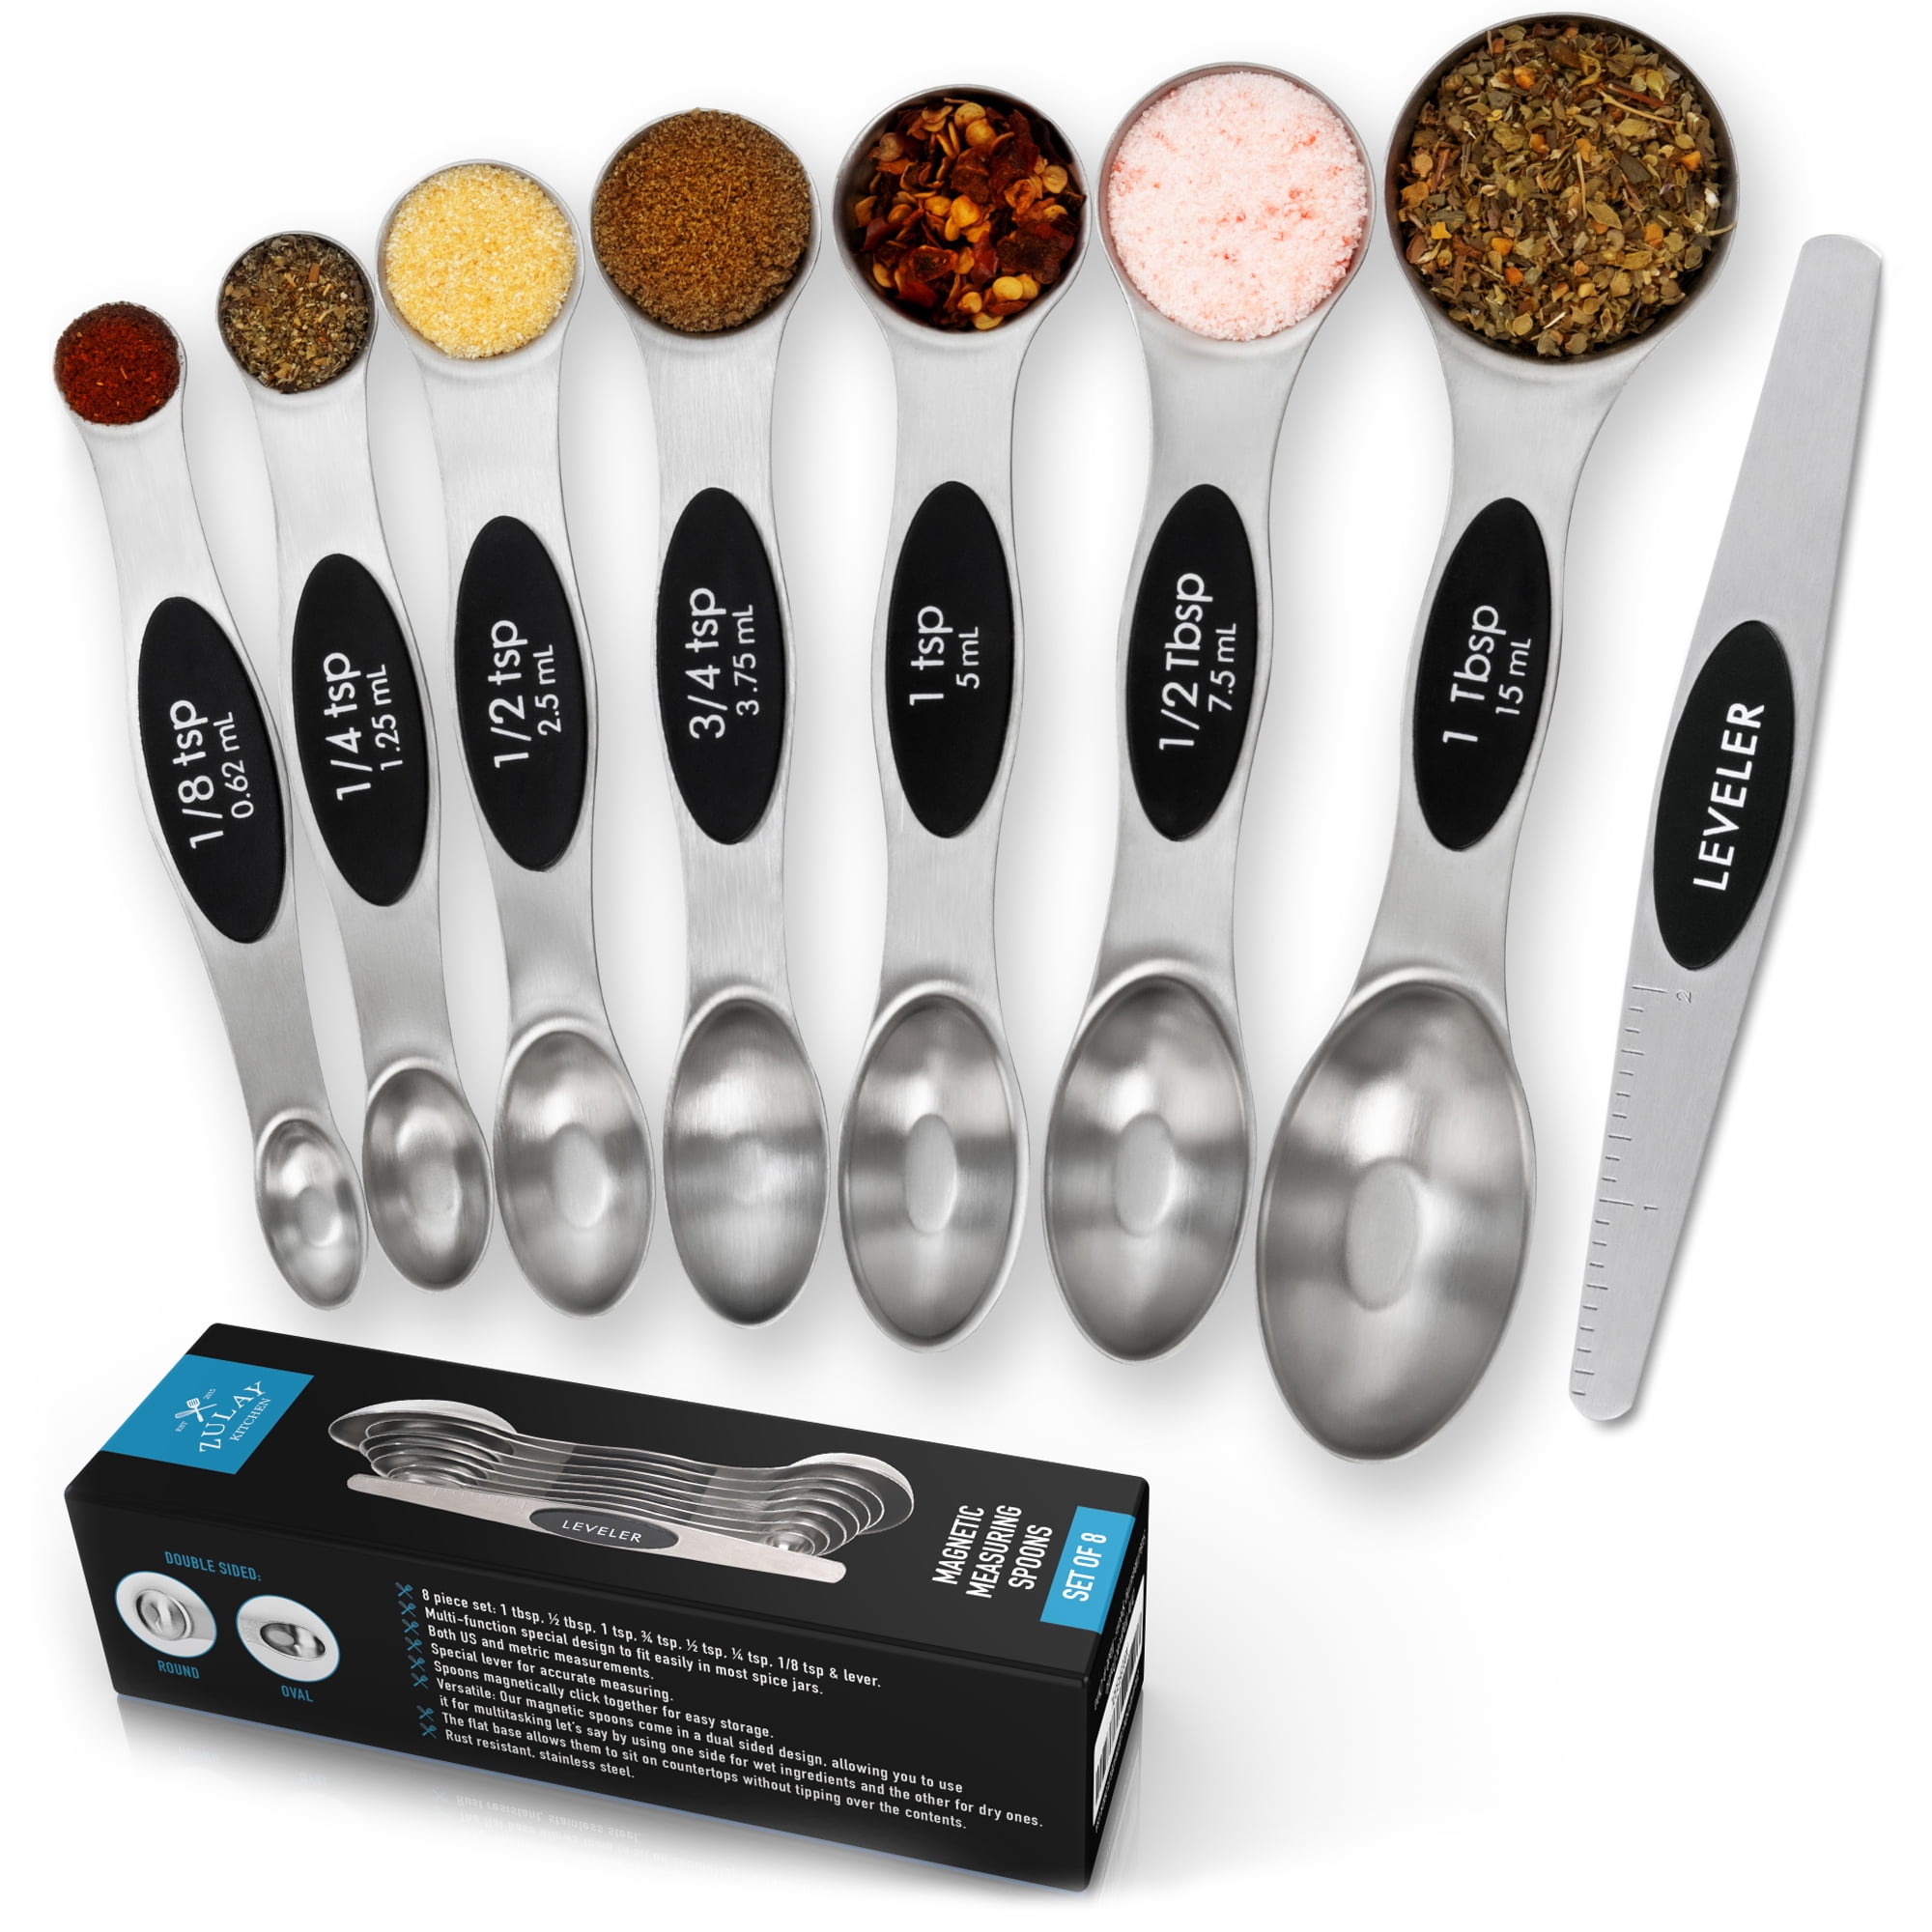 Magnetic Measuring Spoons 8-piece Set with Leveler – Kitchen